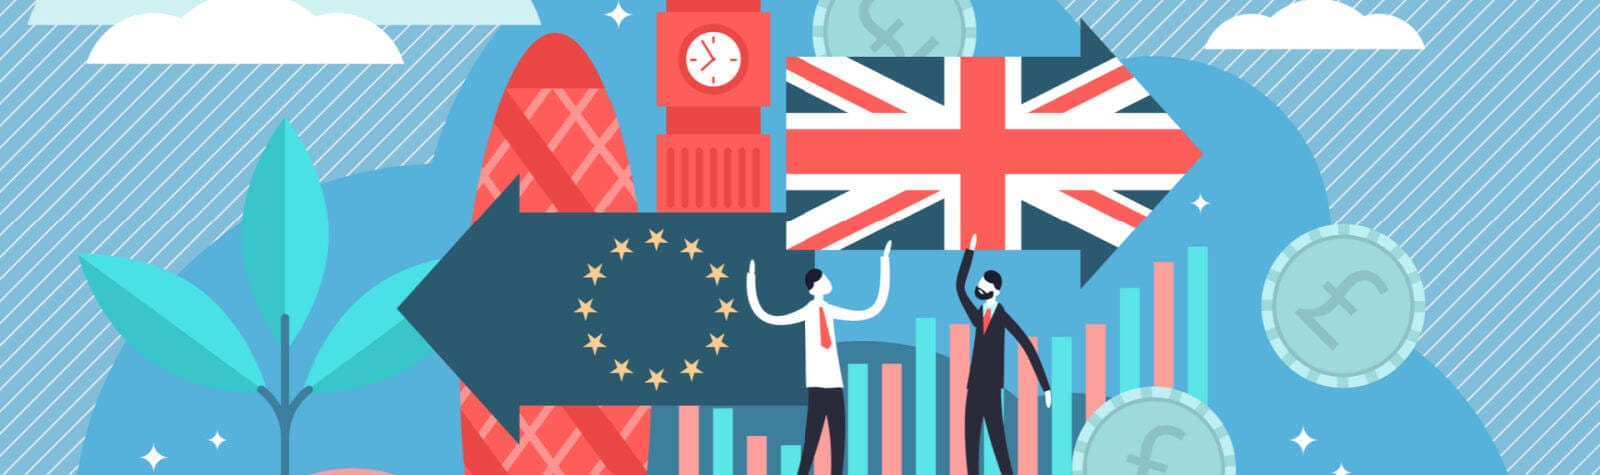 Brexit 2021: Prepare Your eCommerce Business Now For These New Rules